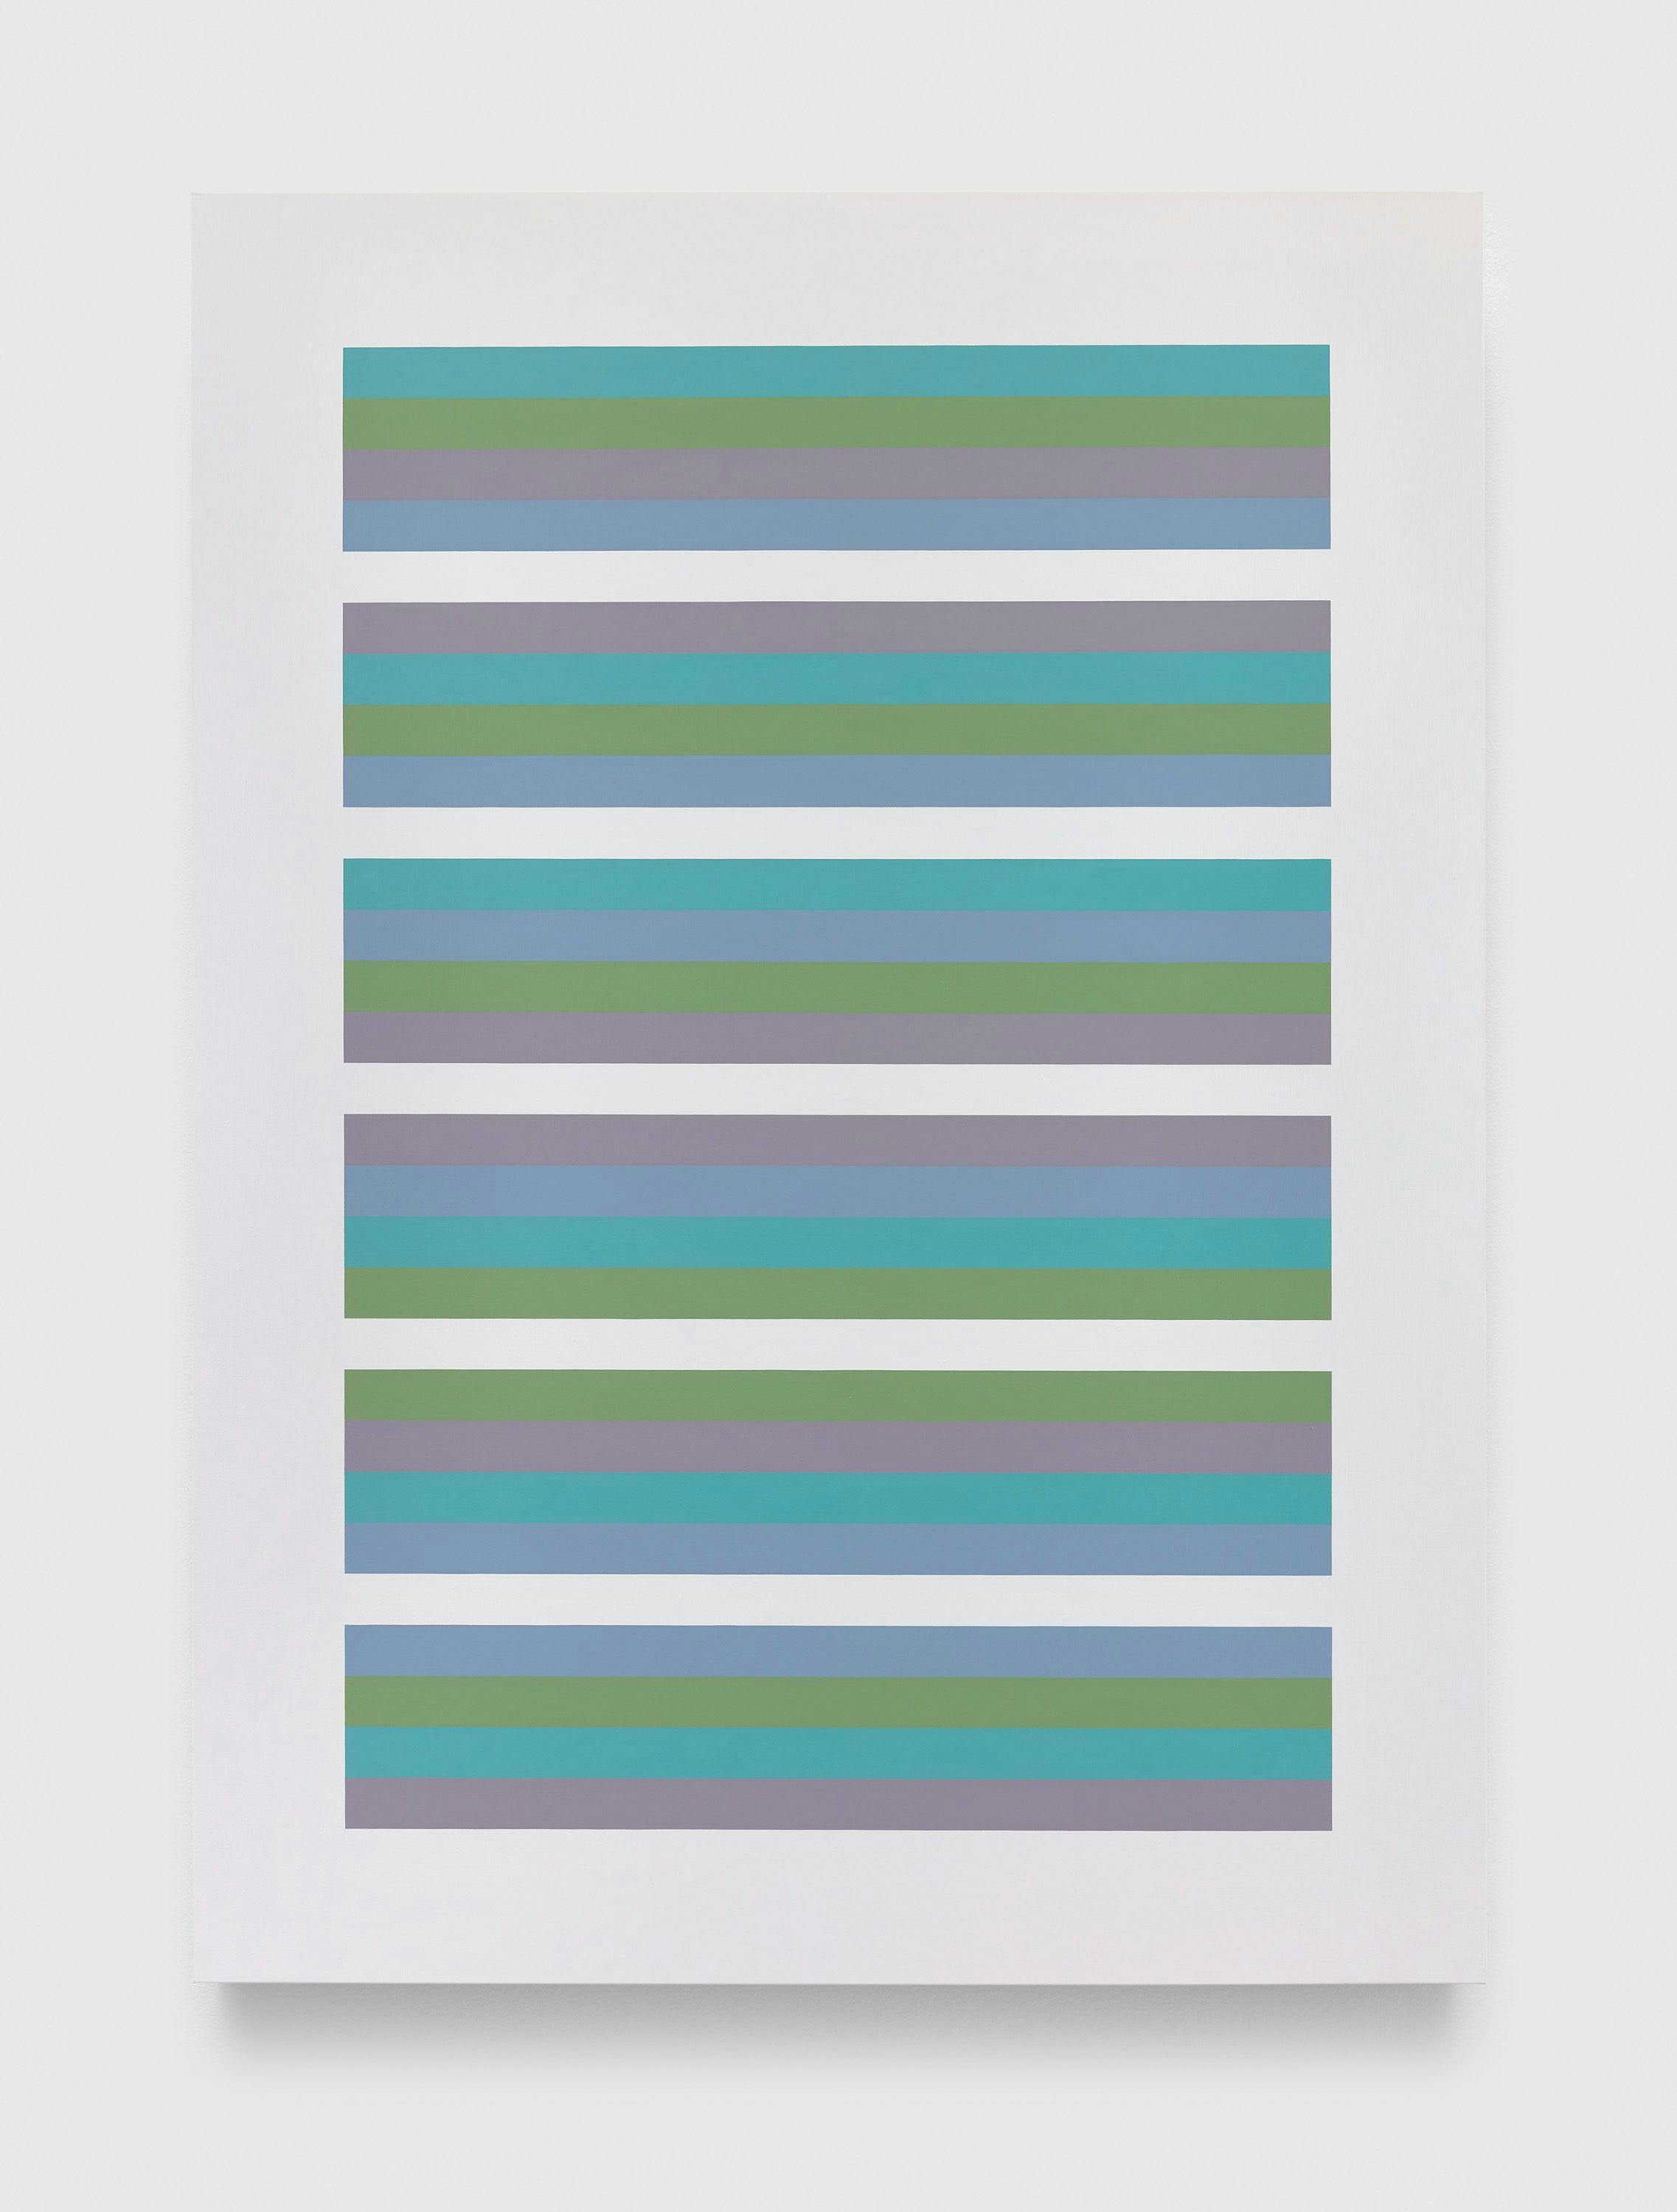 A painting by Bridget Riley, titled Intervals 22, dated 2020.